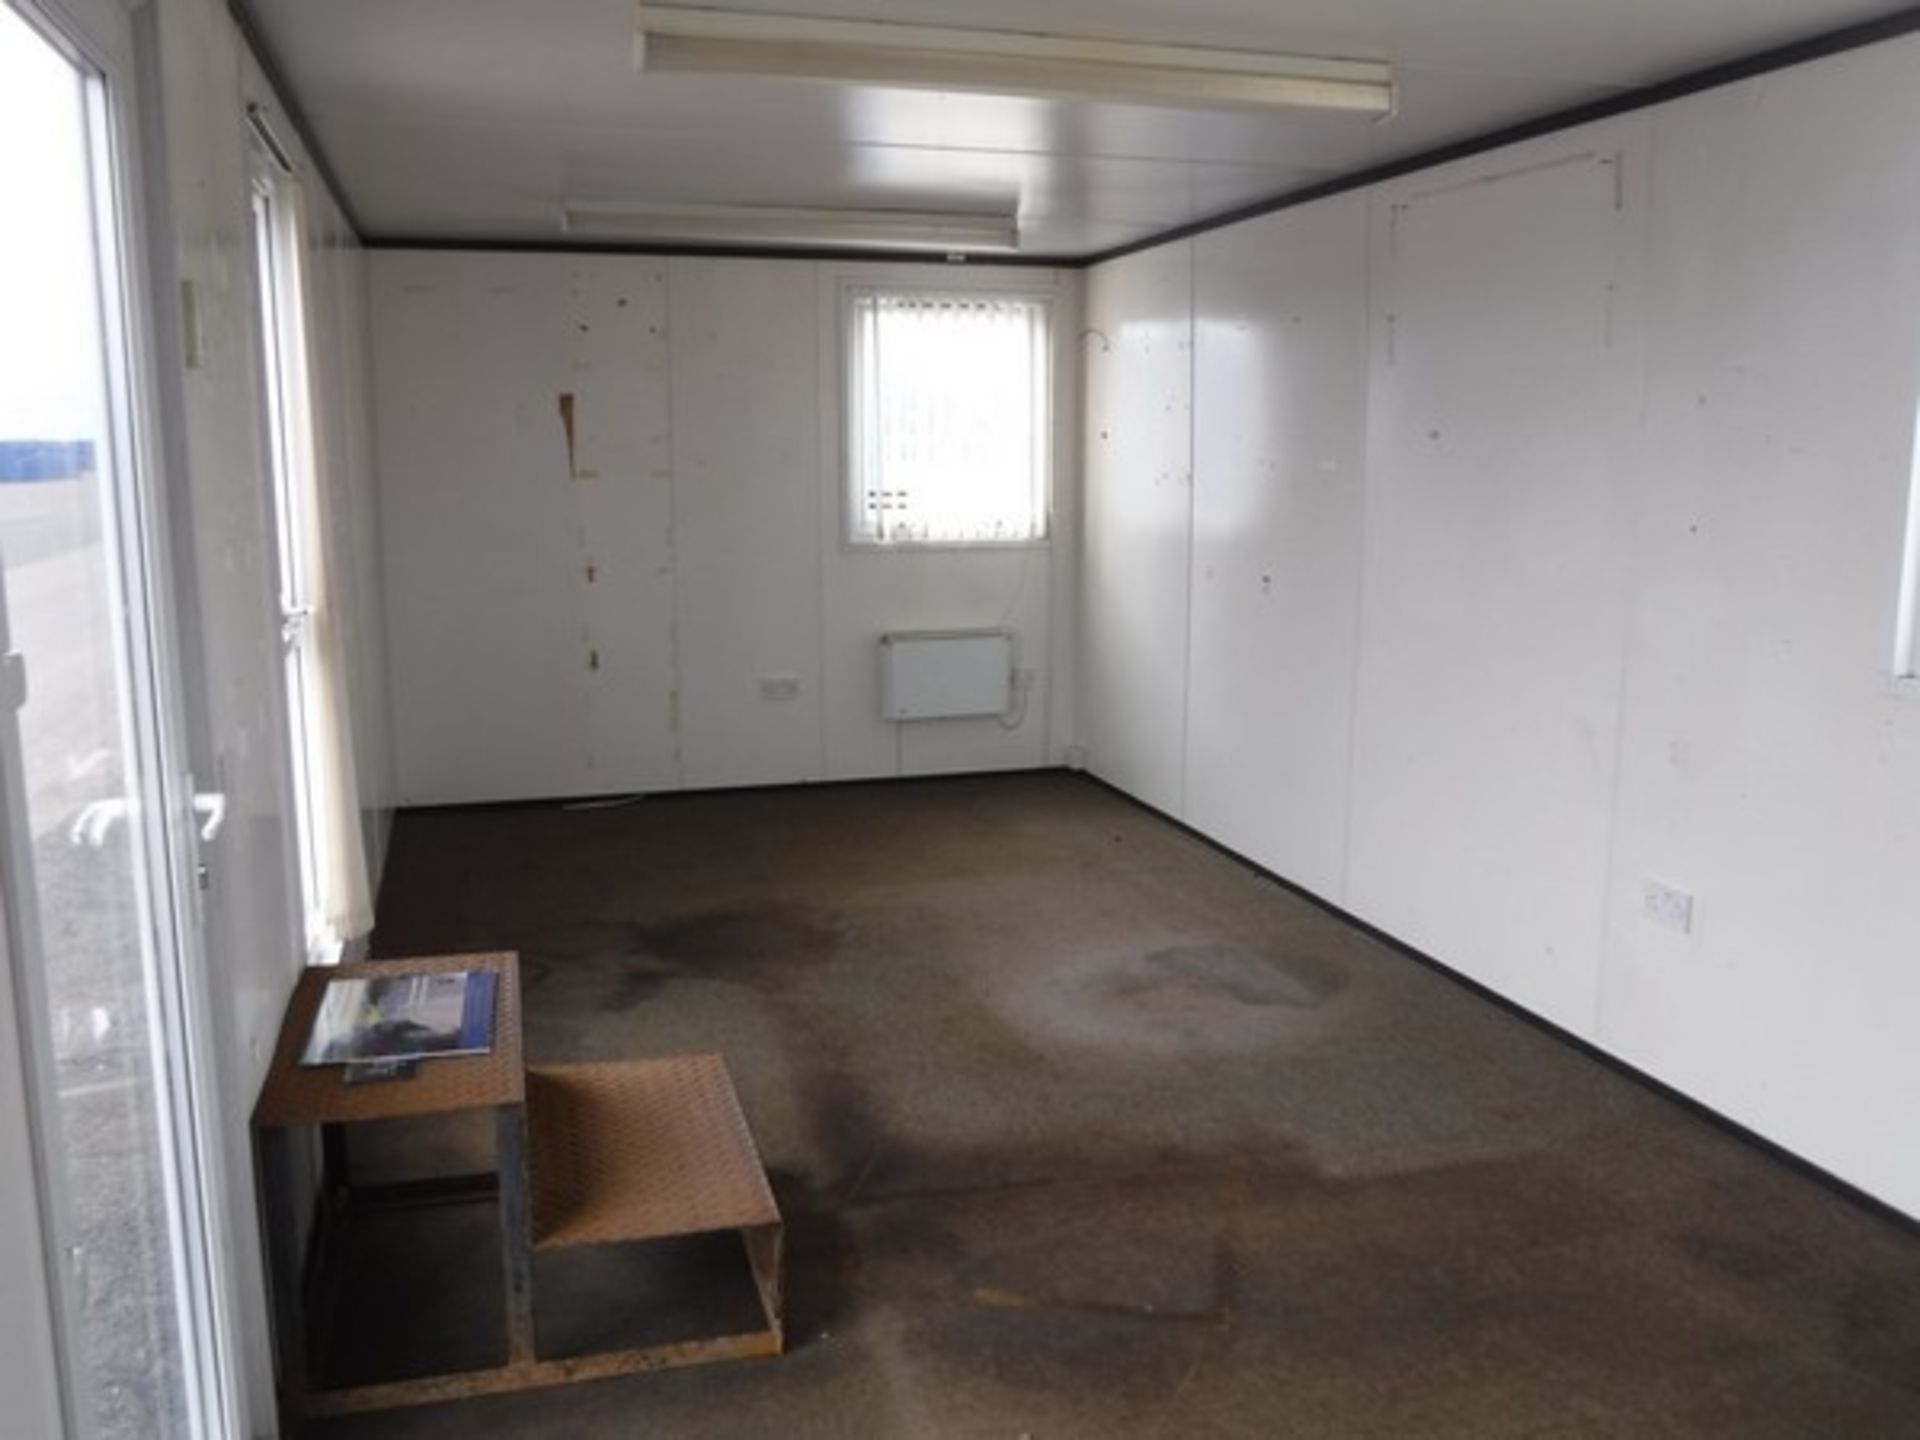 2007 PORTABLE BUILDING. 10m x 3.1m with toilet & kitchen. Double glazed, alarm fitted, insulated. - Image 10 of 12